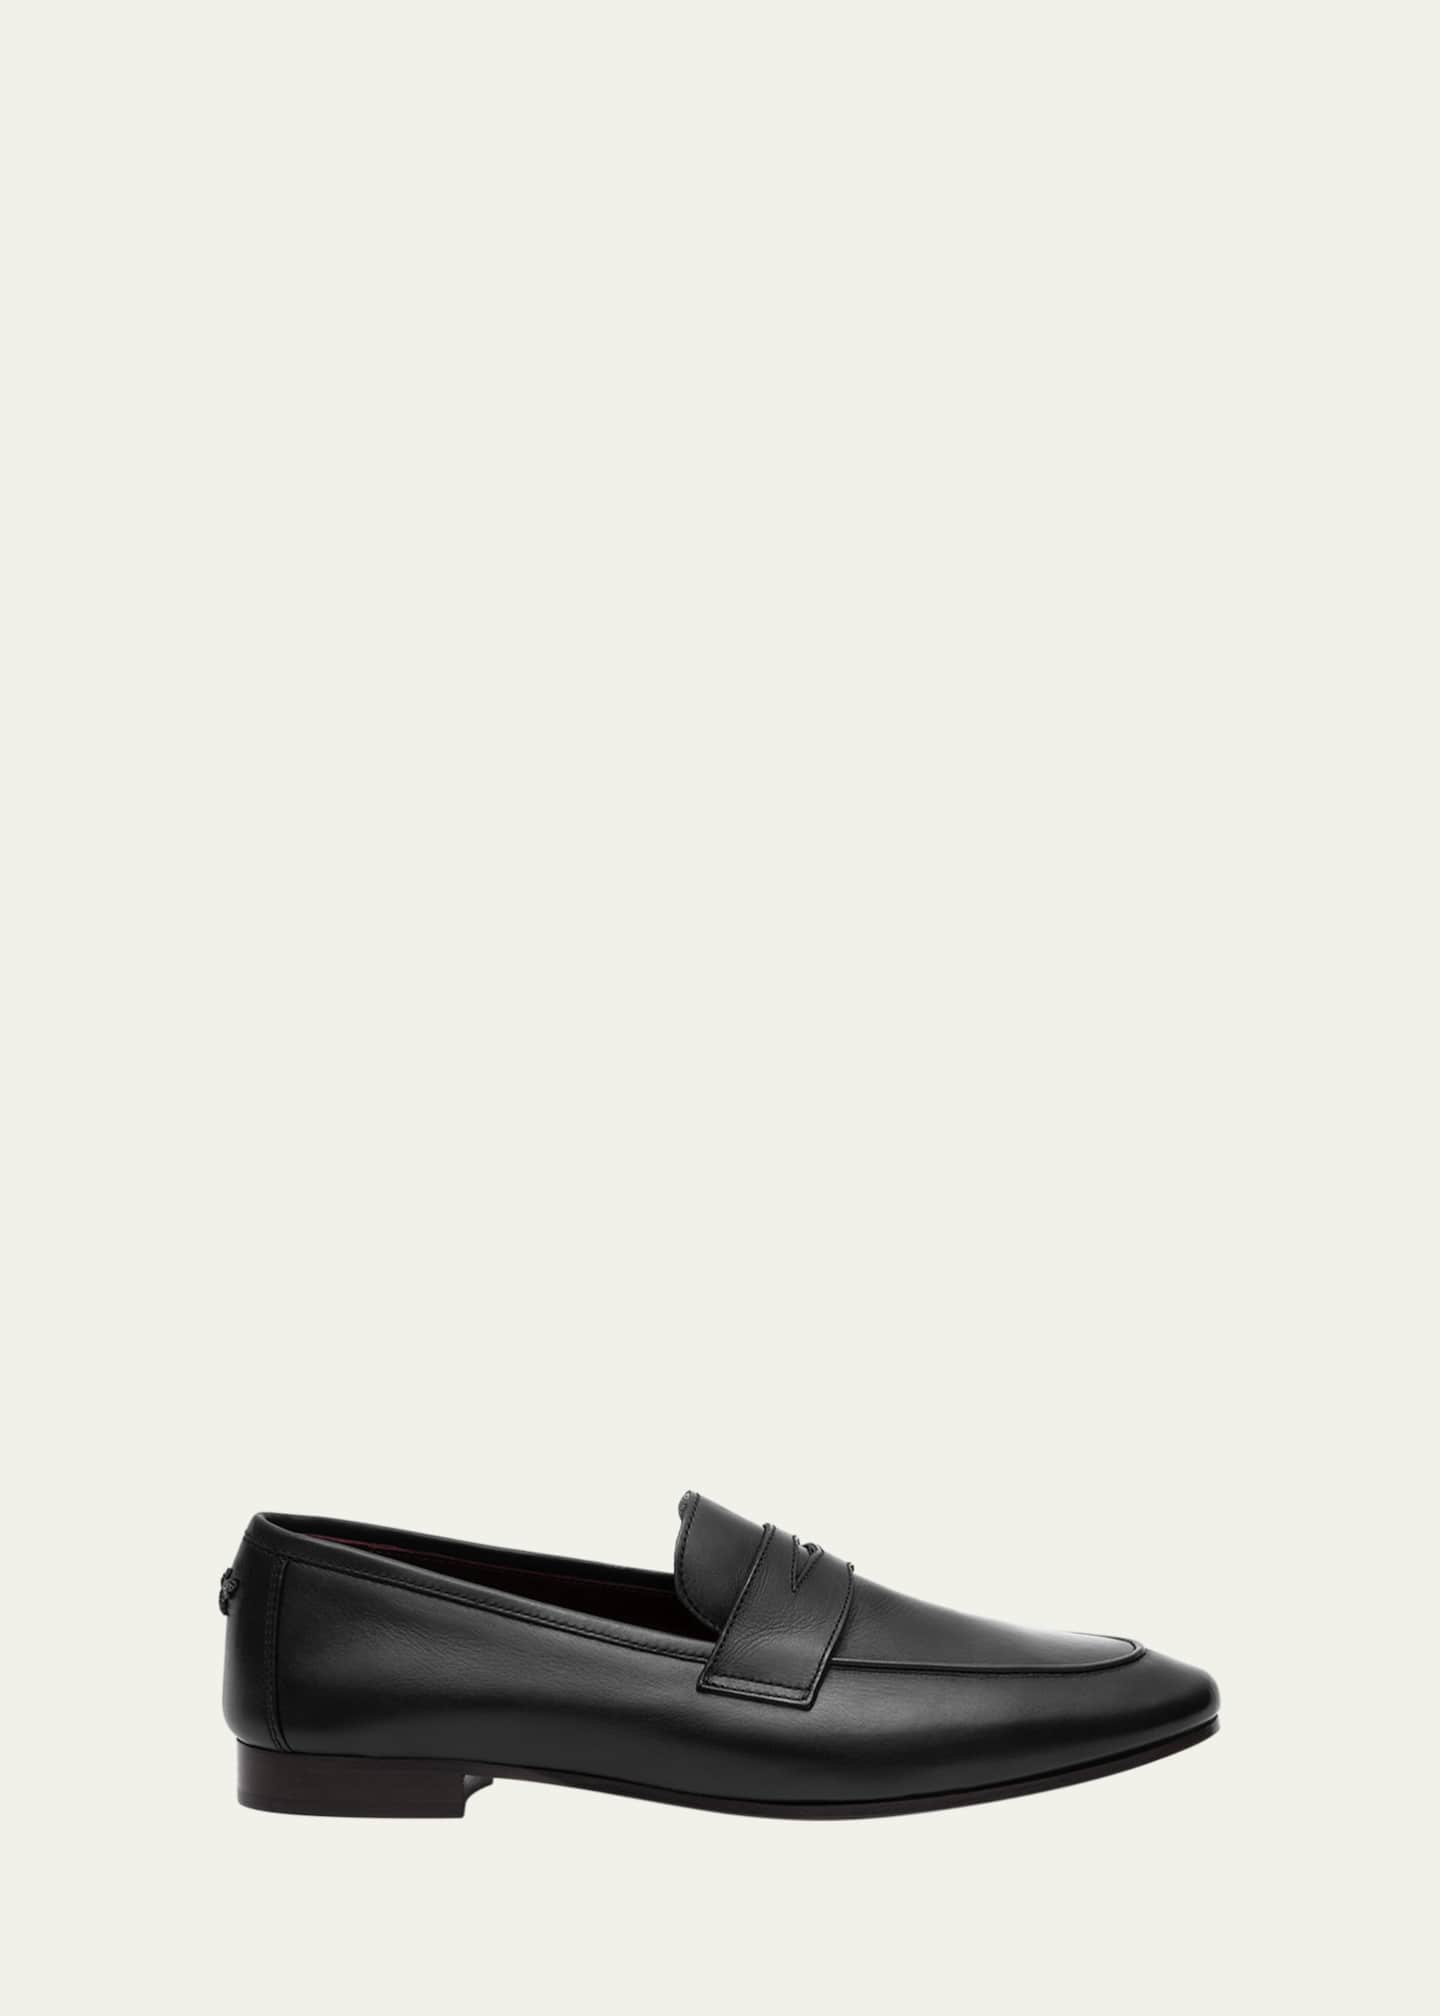 Bougeotte Flaneur Leather Flat Penny Loafers - Bergdorf Goodman